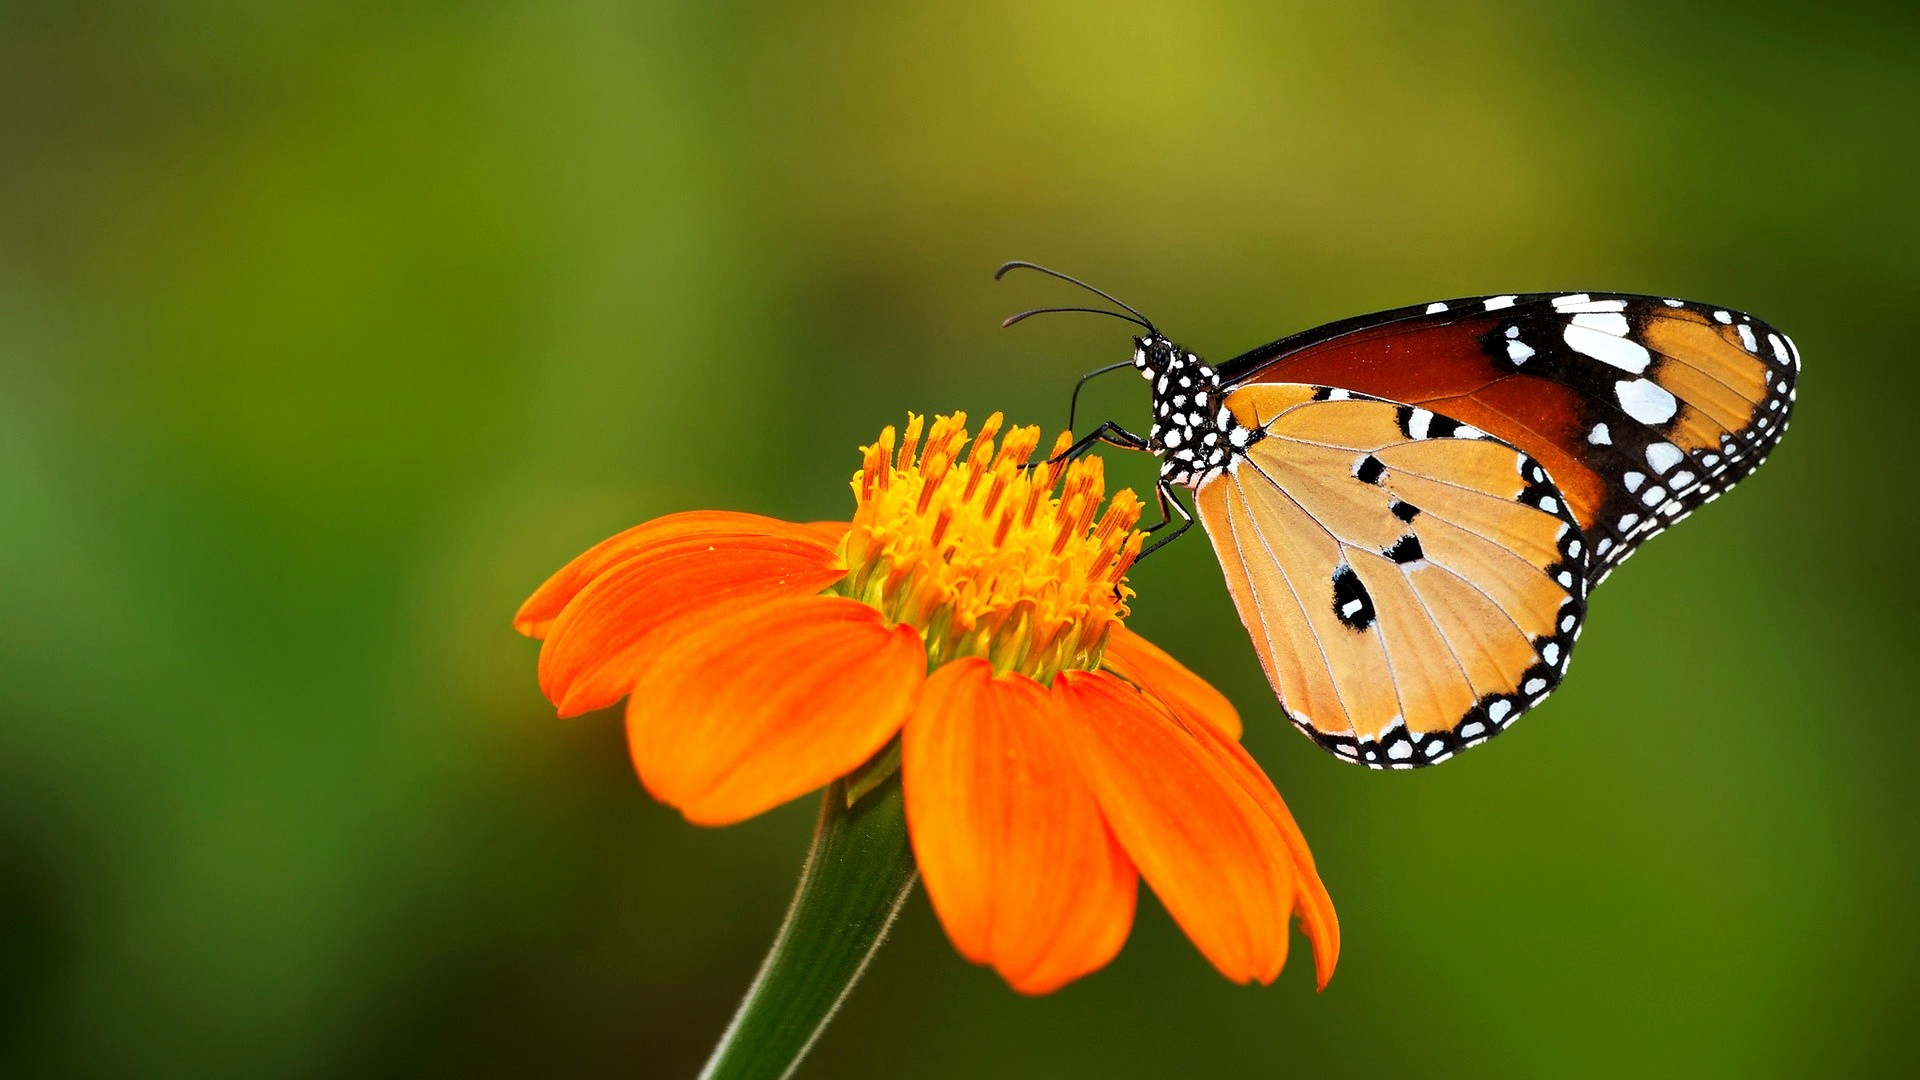 Image Of butterfly On Flower Awesome butterflies and Flowers ...